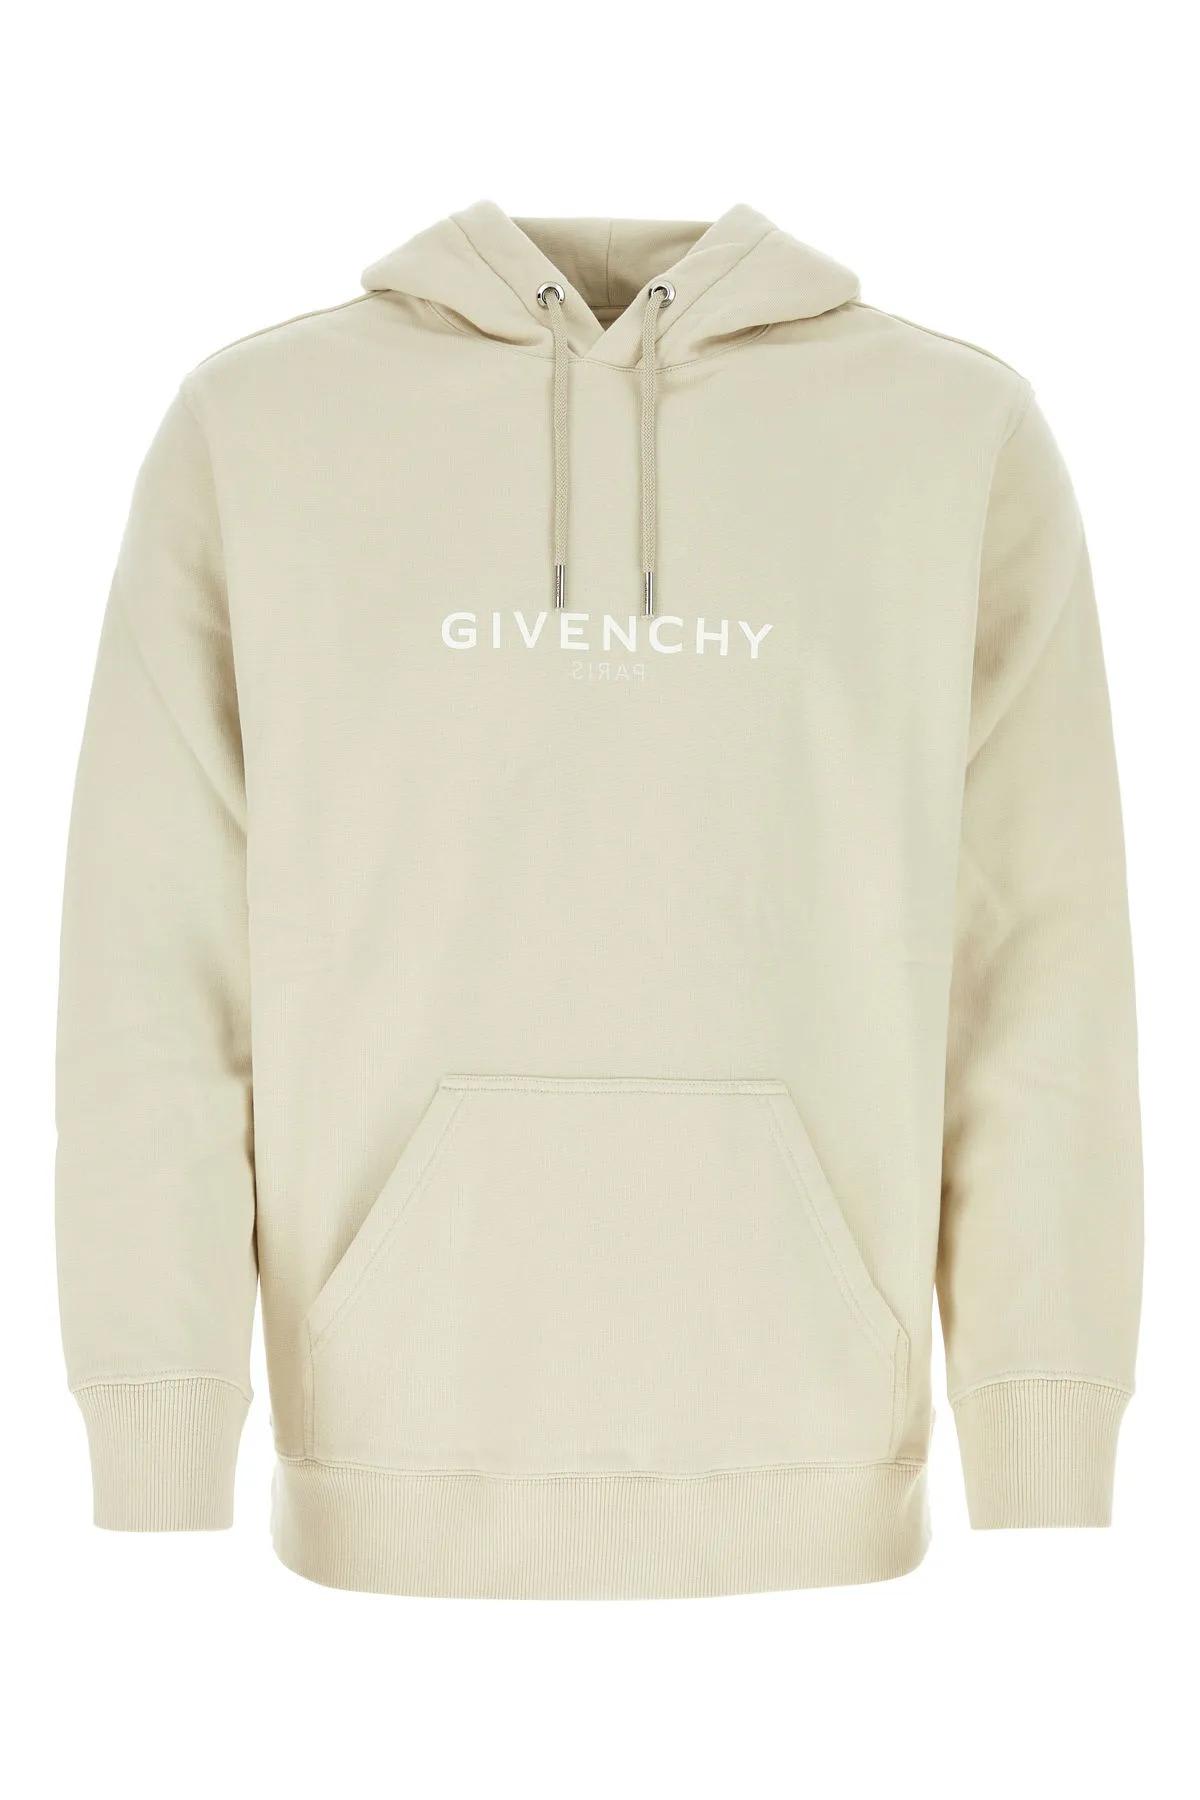 Givenchy Sand Cotton Sweatshirt In Gray